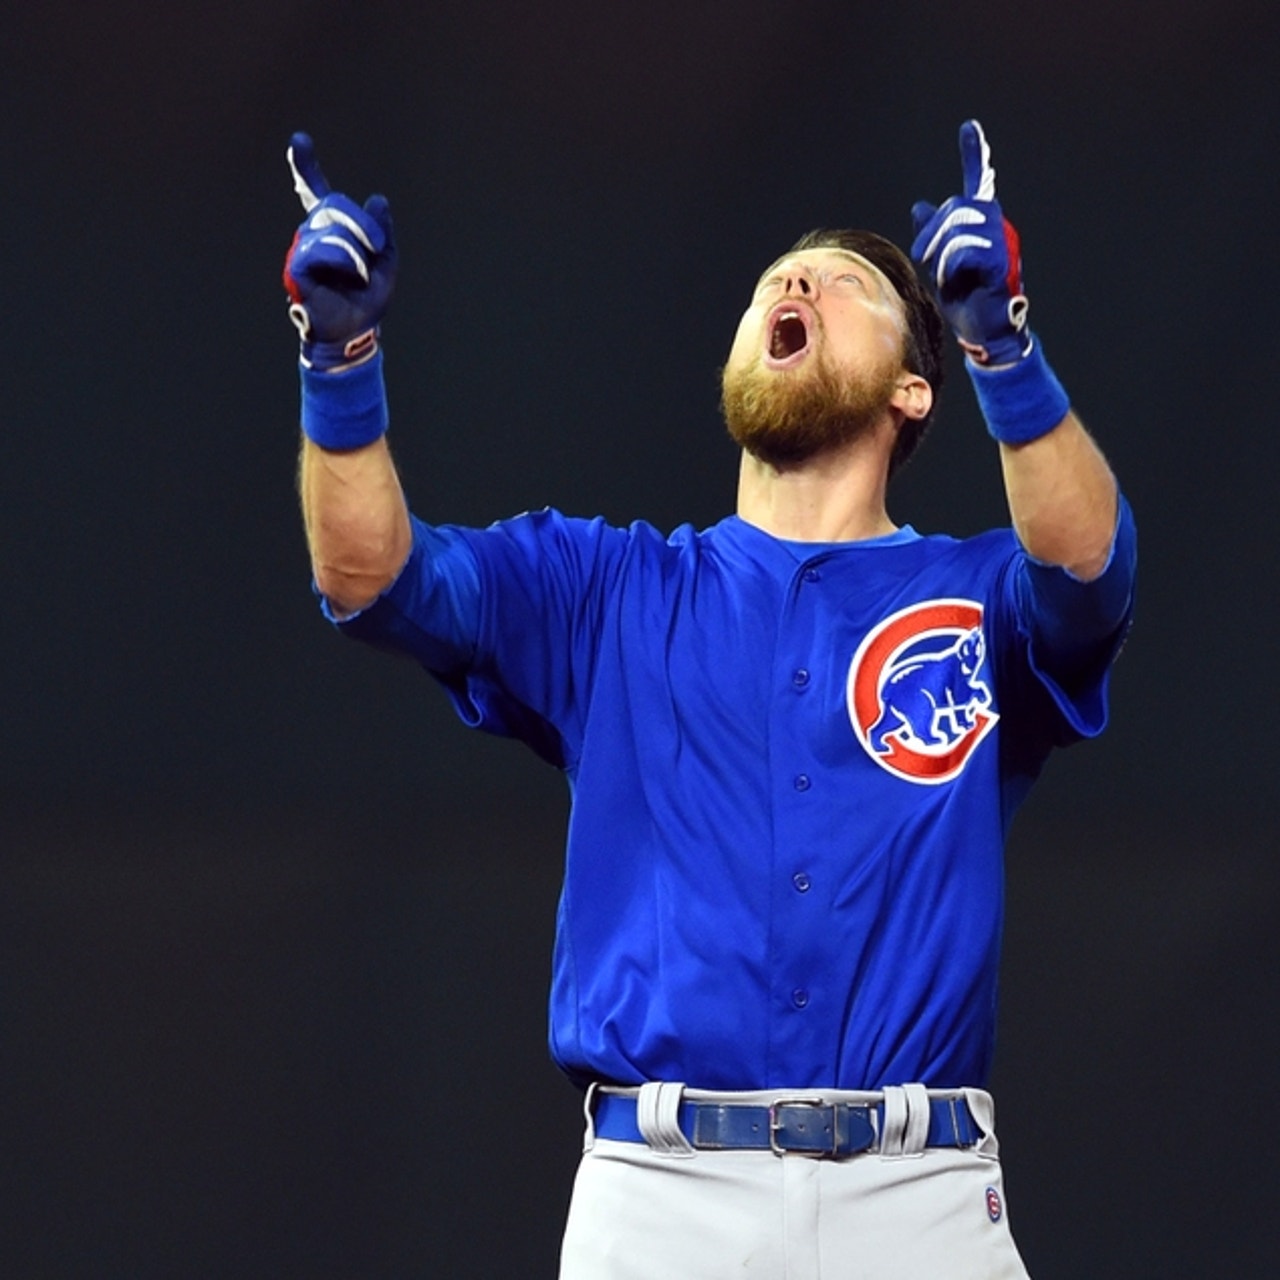 Chicago Cubs: Ben Zobrist earns World Series MVP in first year